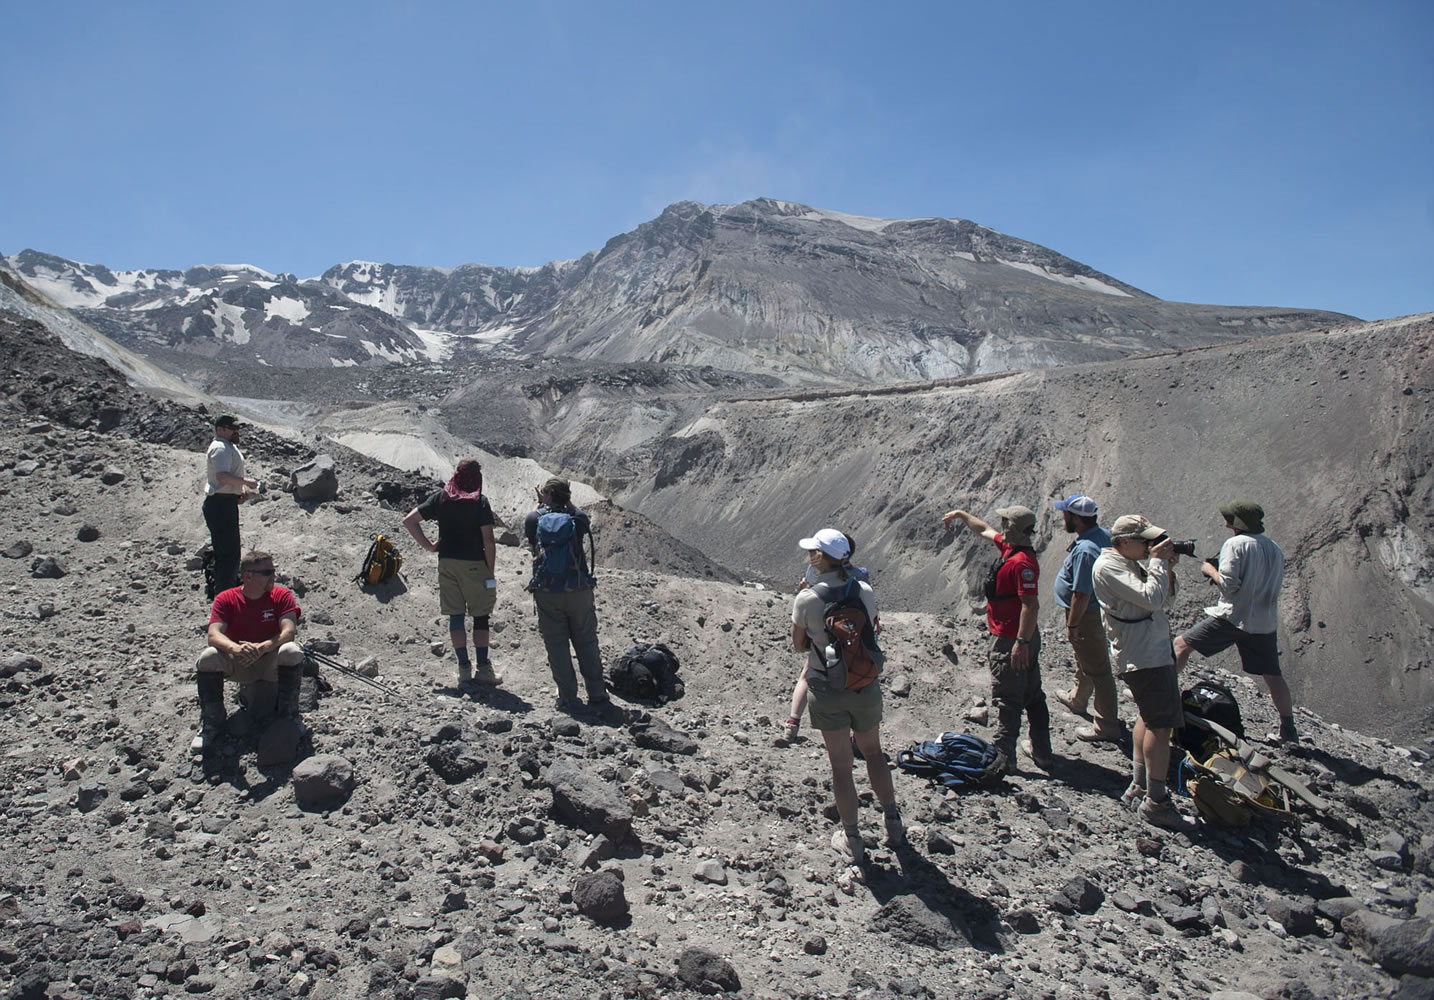 A group of journalists and other hikers stand near the rim of Mount St. Helens' crater recently. The Mount St.